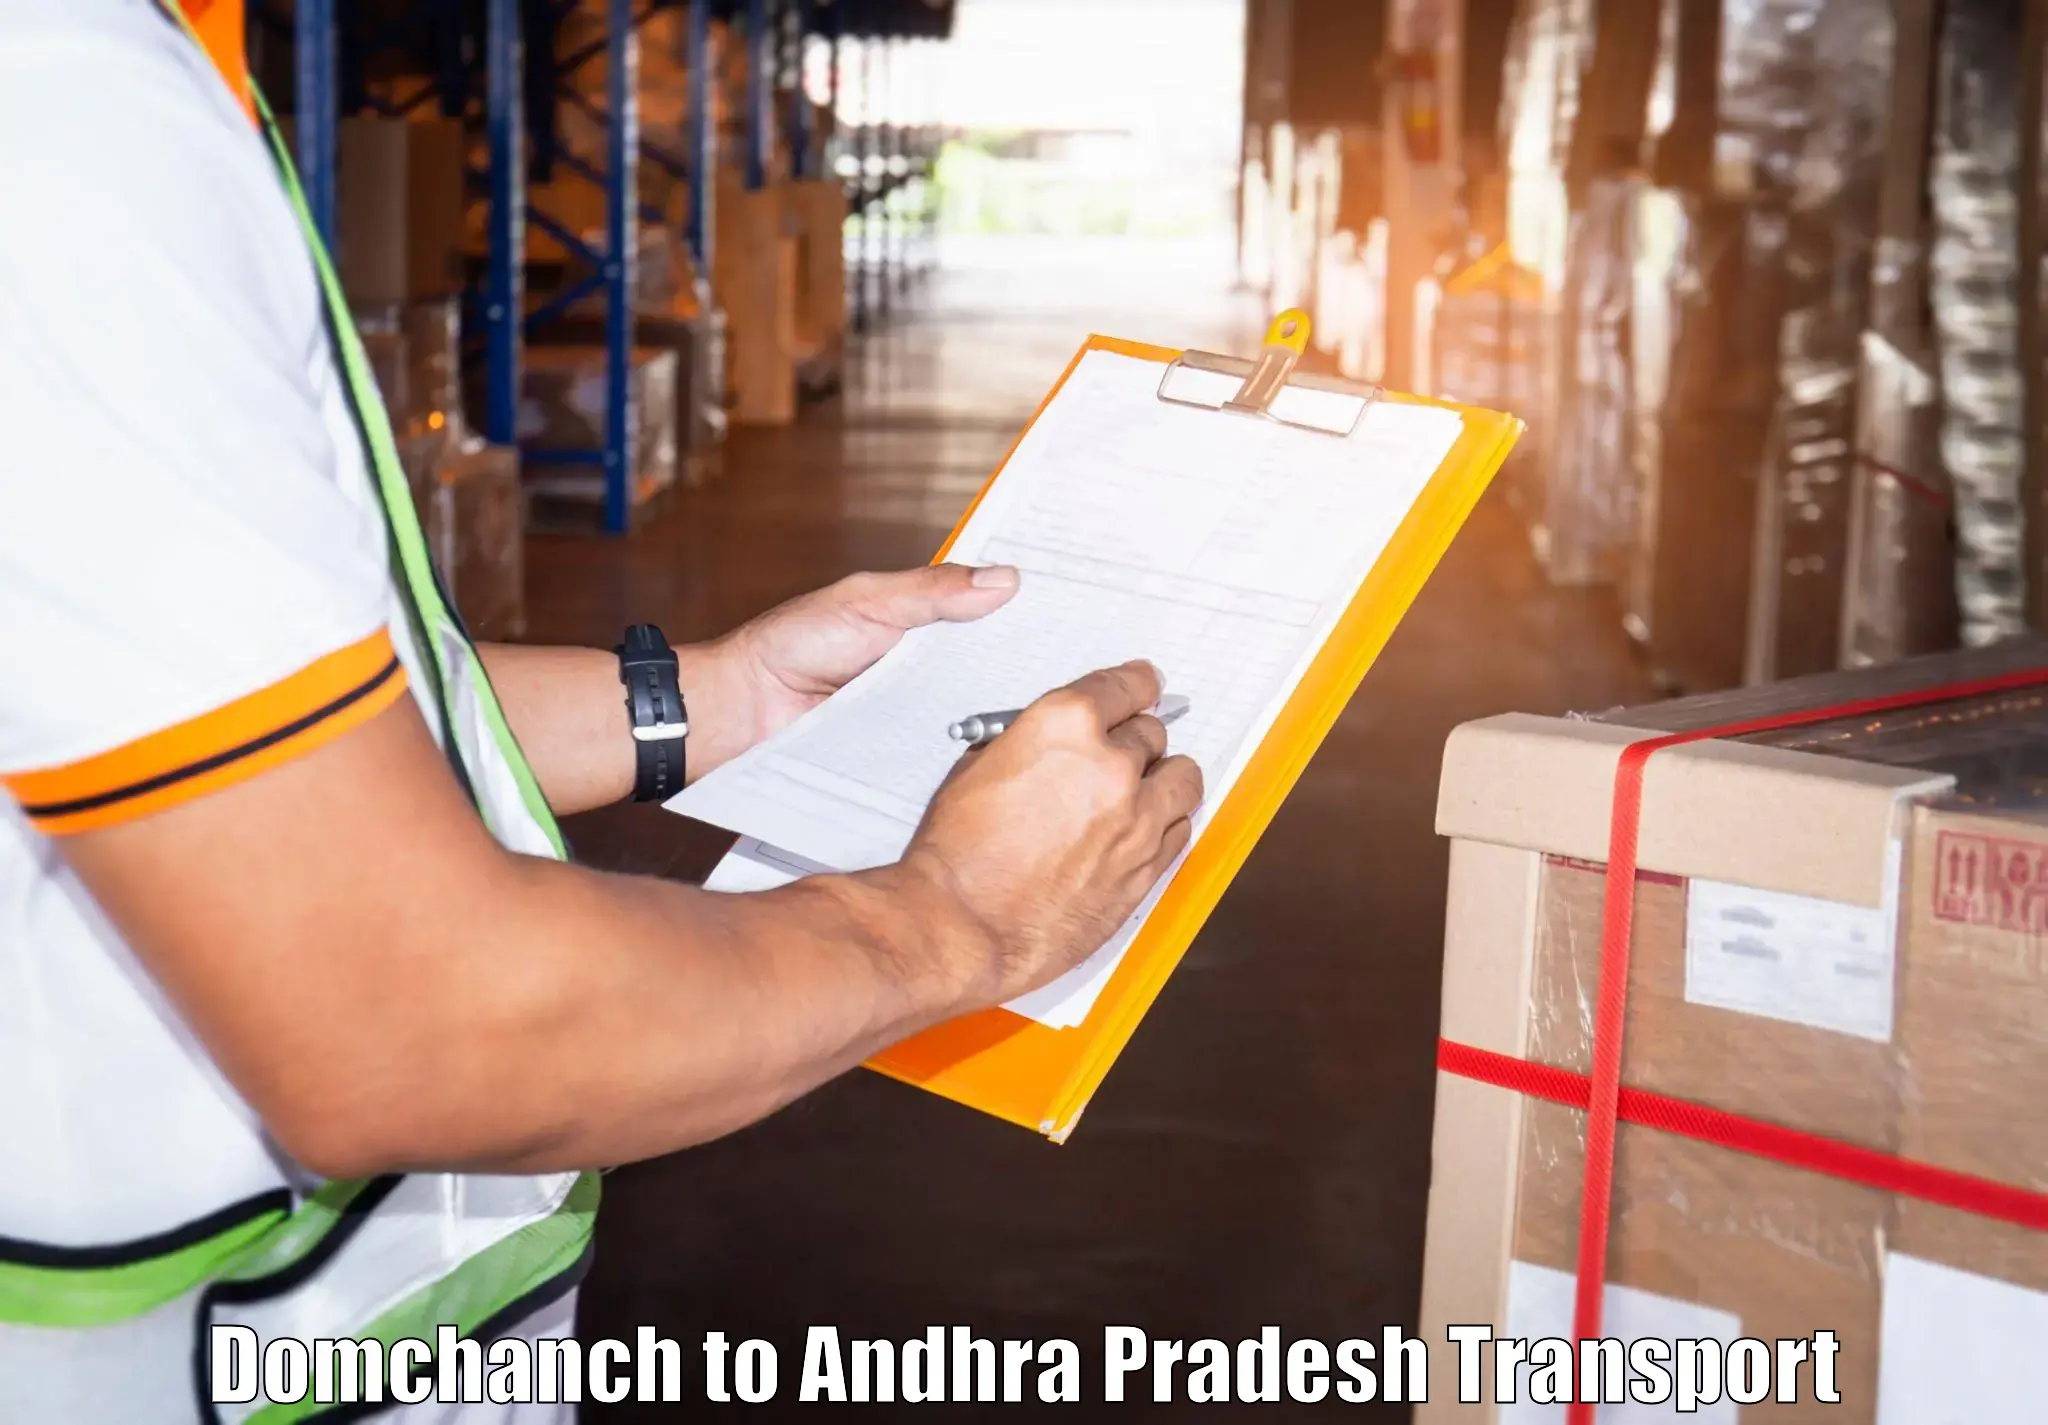 Air freight transport services Domchanch to Chintapalli